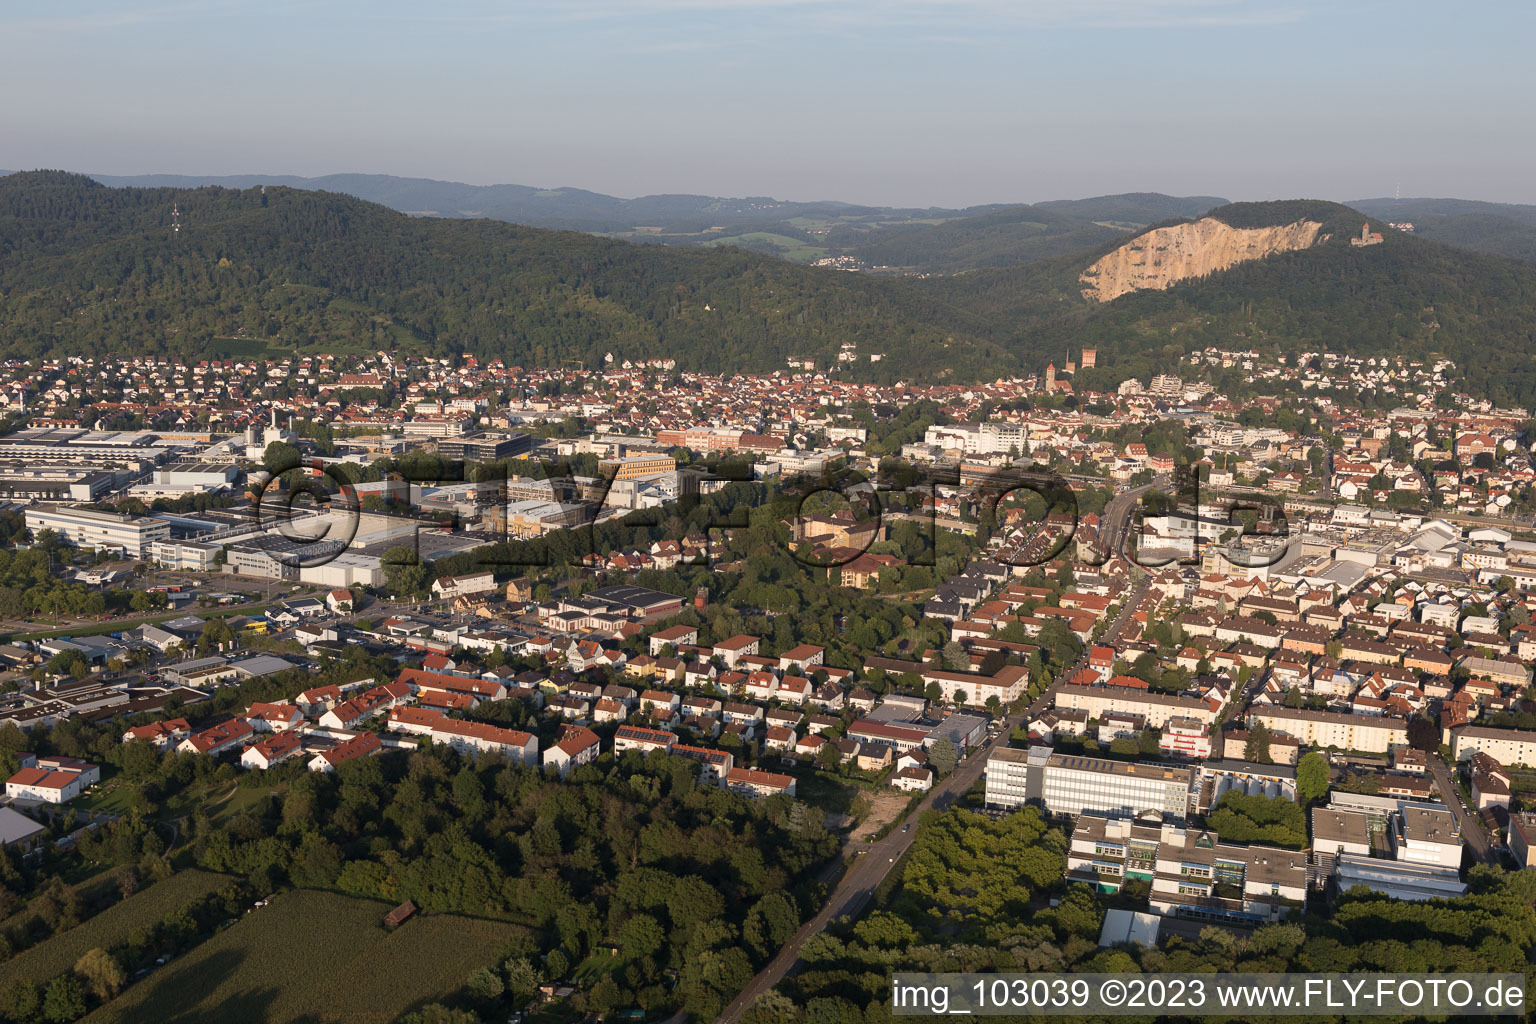 Drone recording of Weinheim in the state Baden-Wuerttemberg, Germany